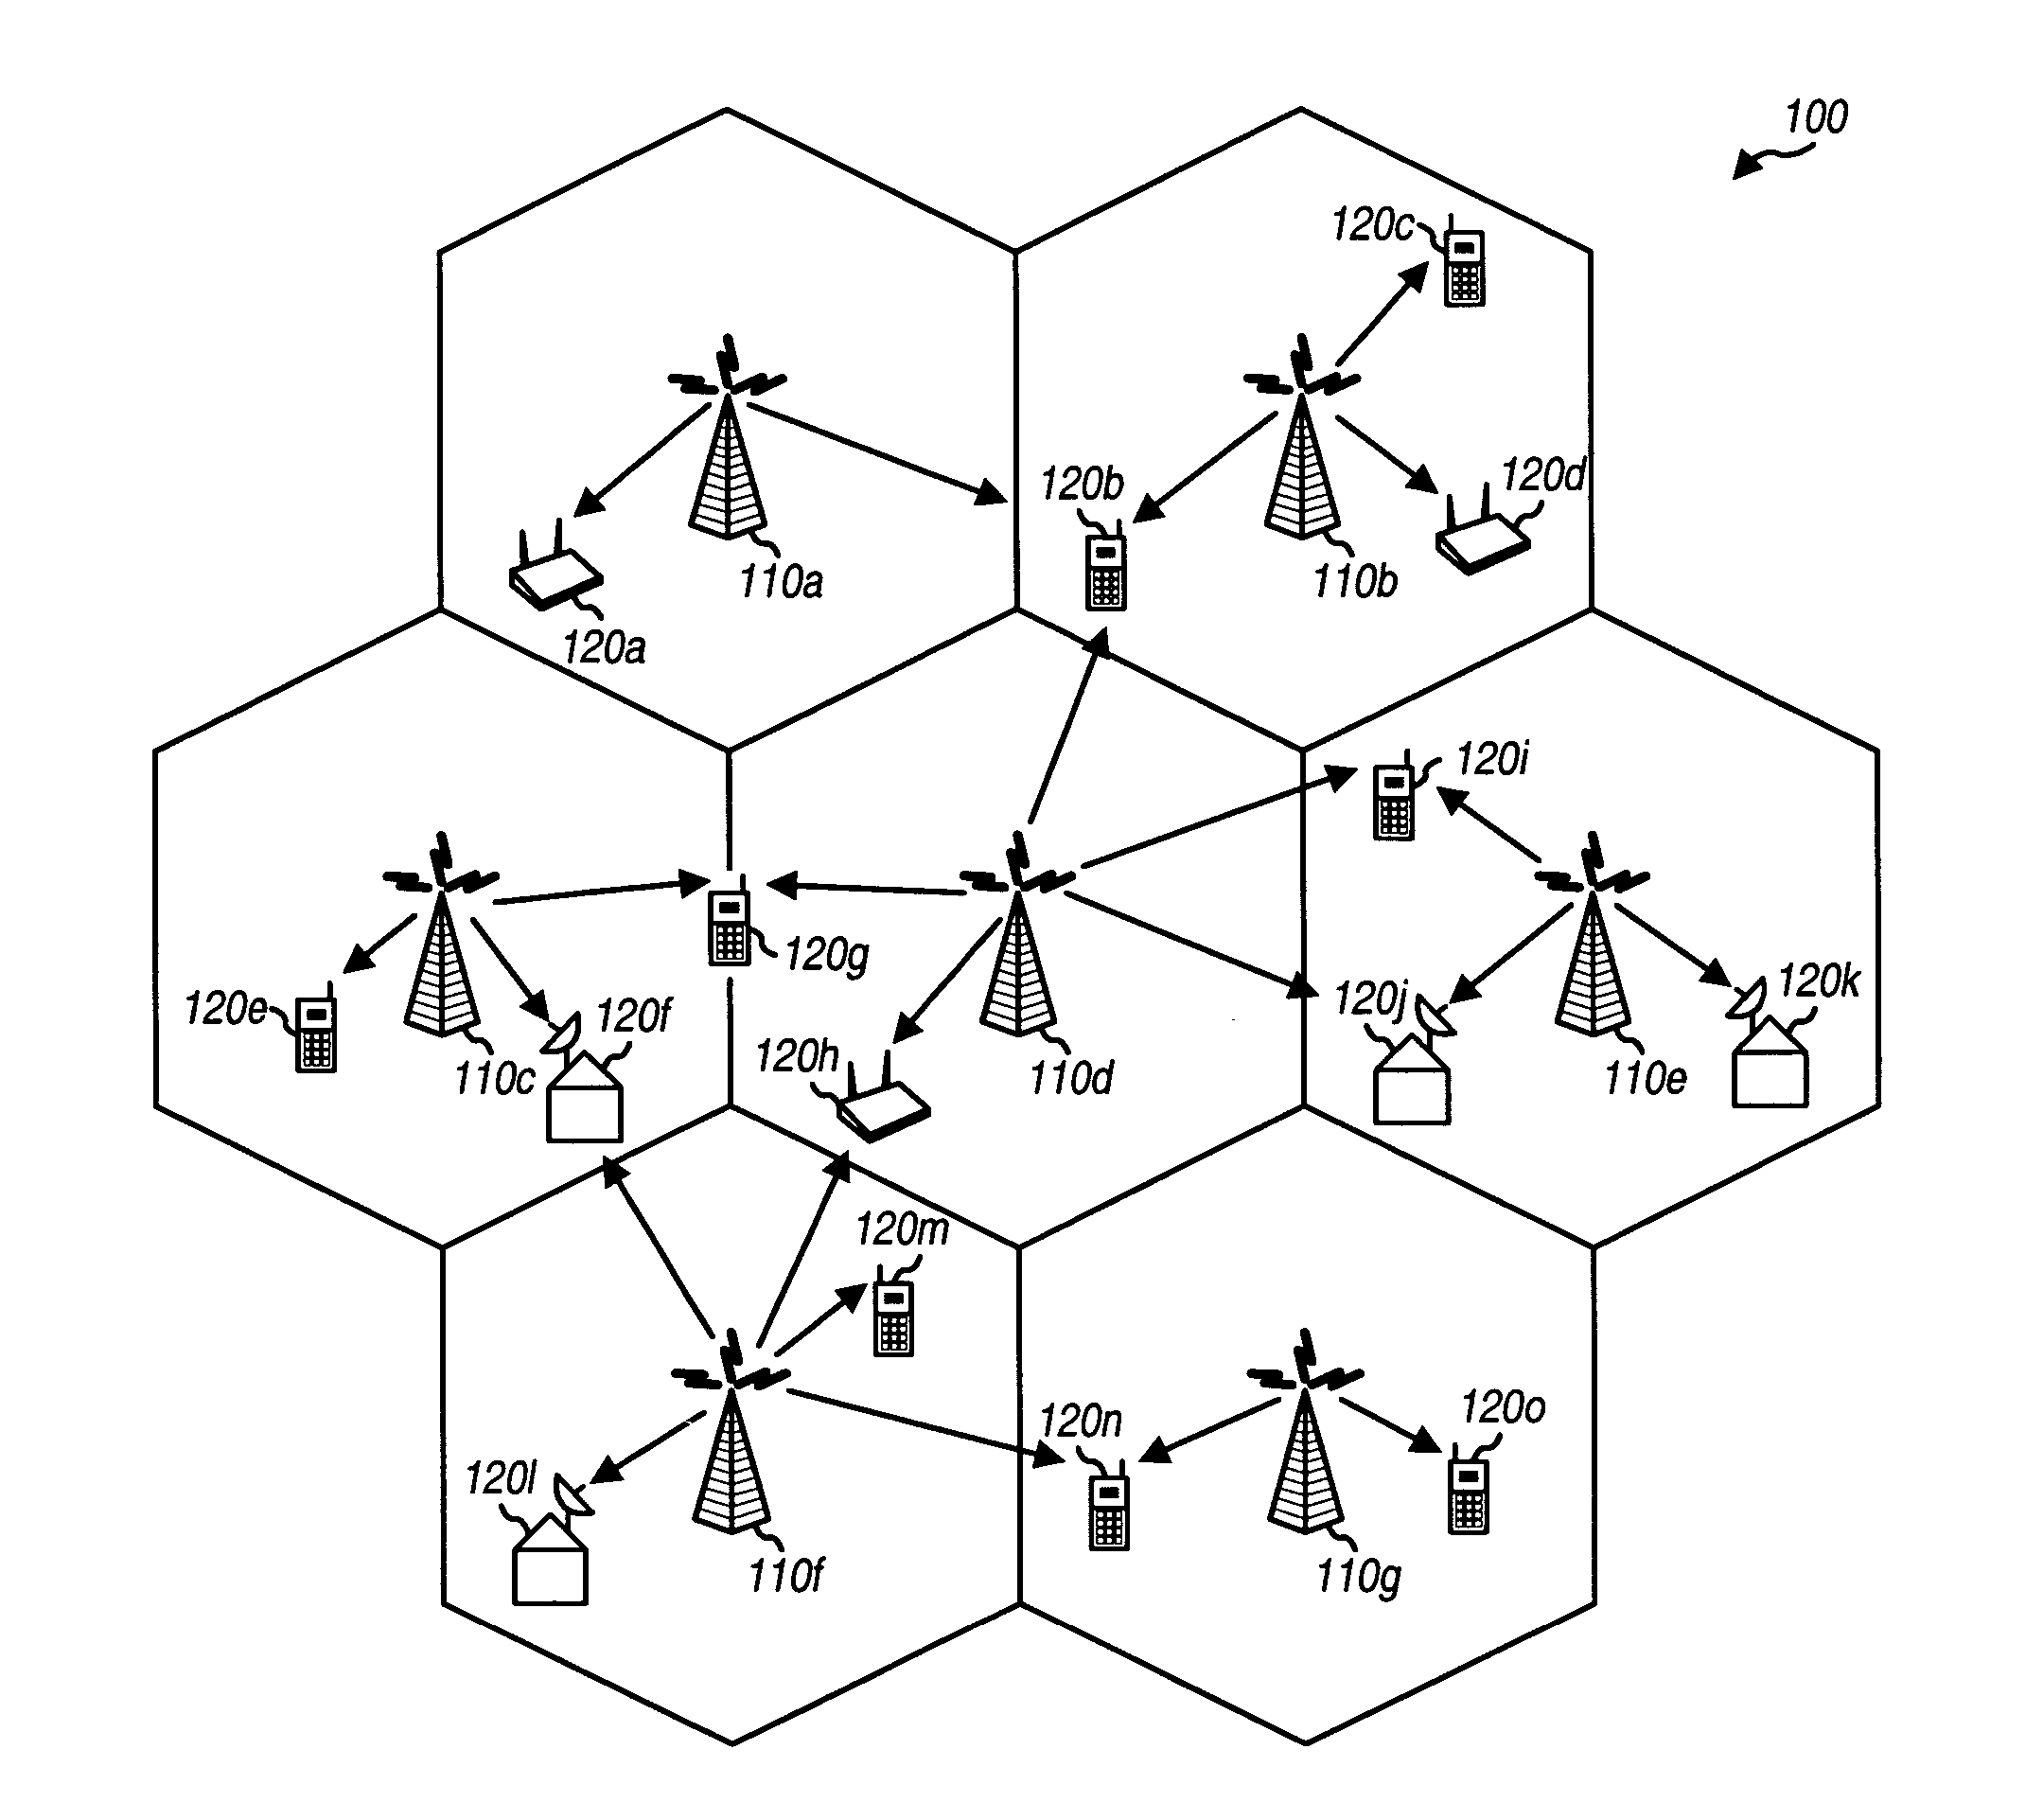 Multiplexing and transmission of multiple data streams in a wireless multi-carrier communication system